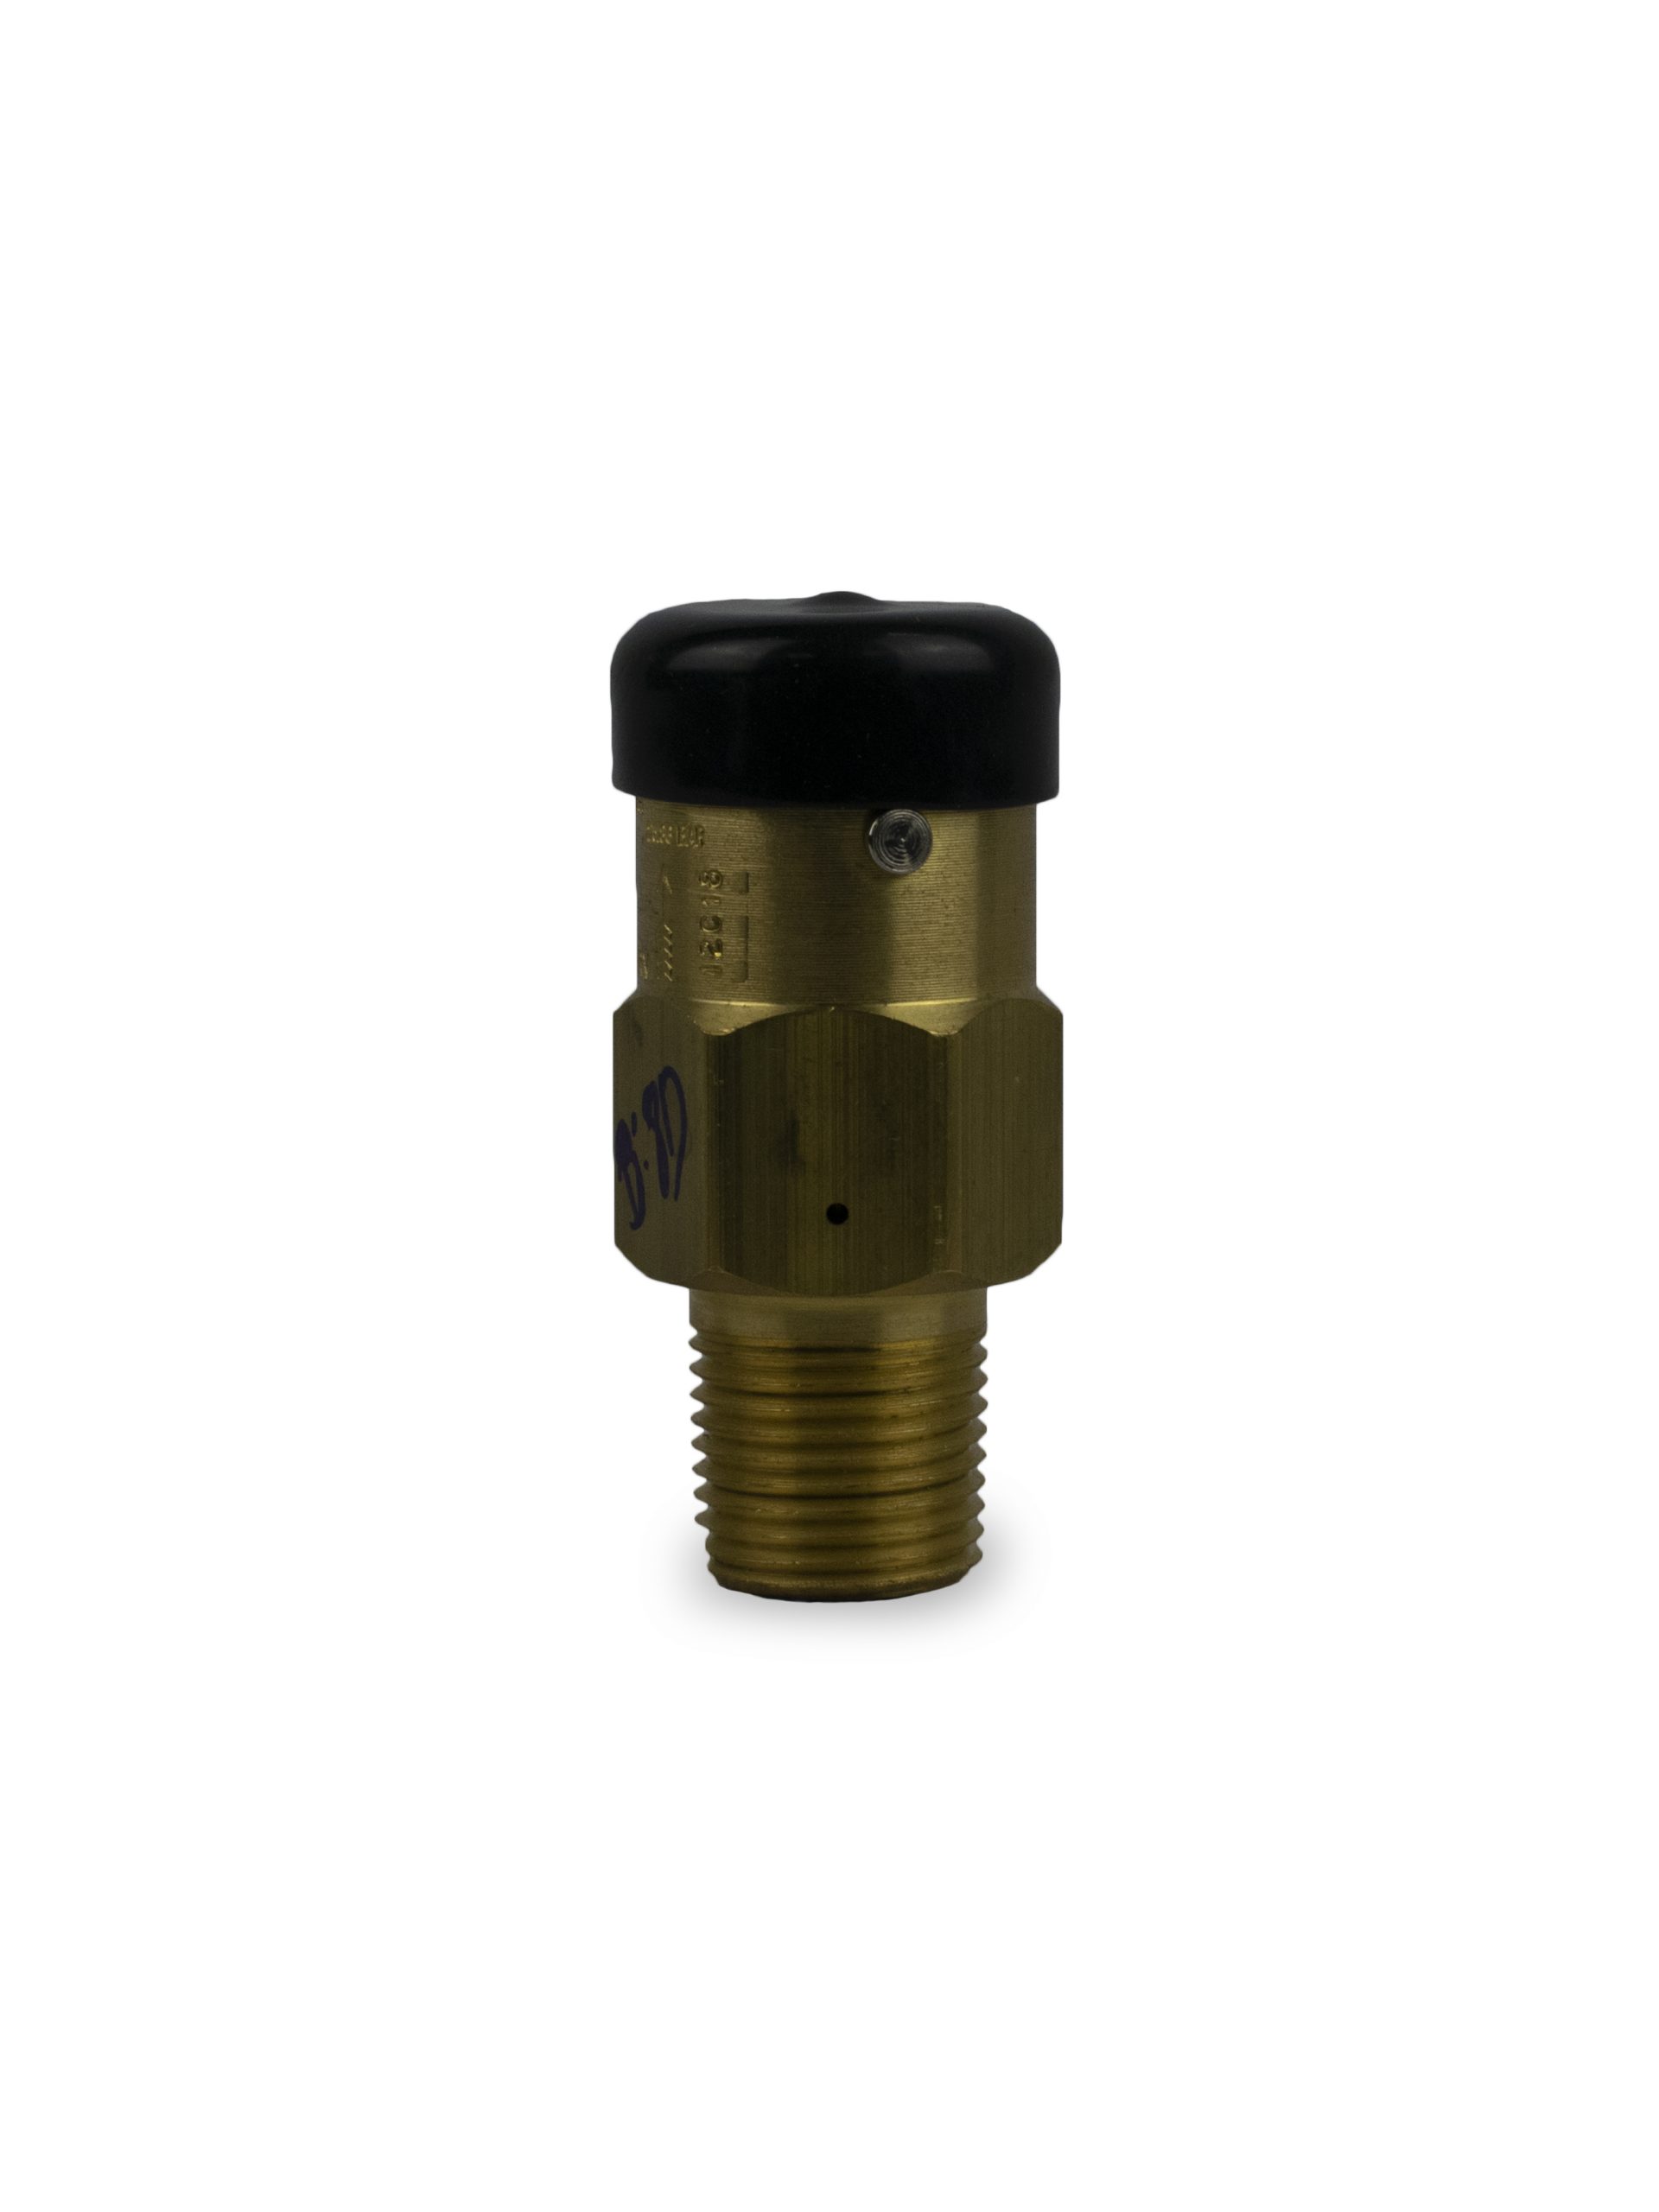 SAFETY RELEIF VALVE 1/2 Inches MALE NPT